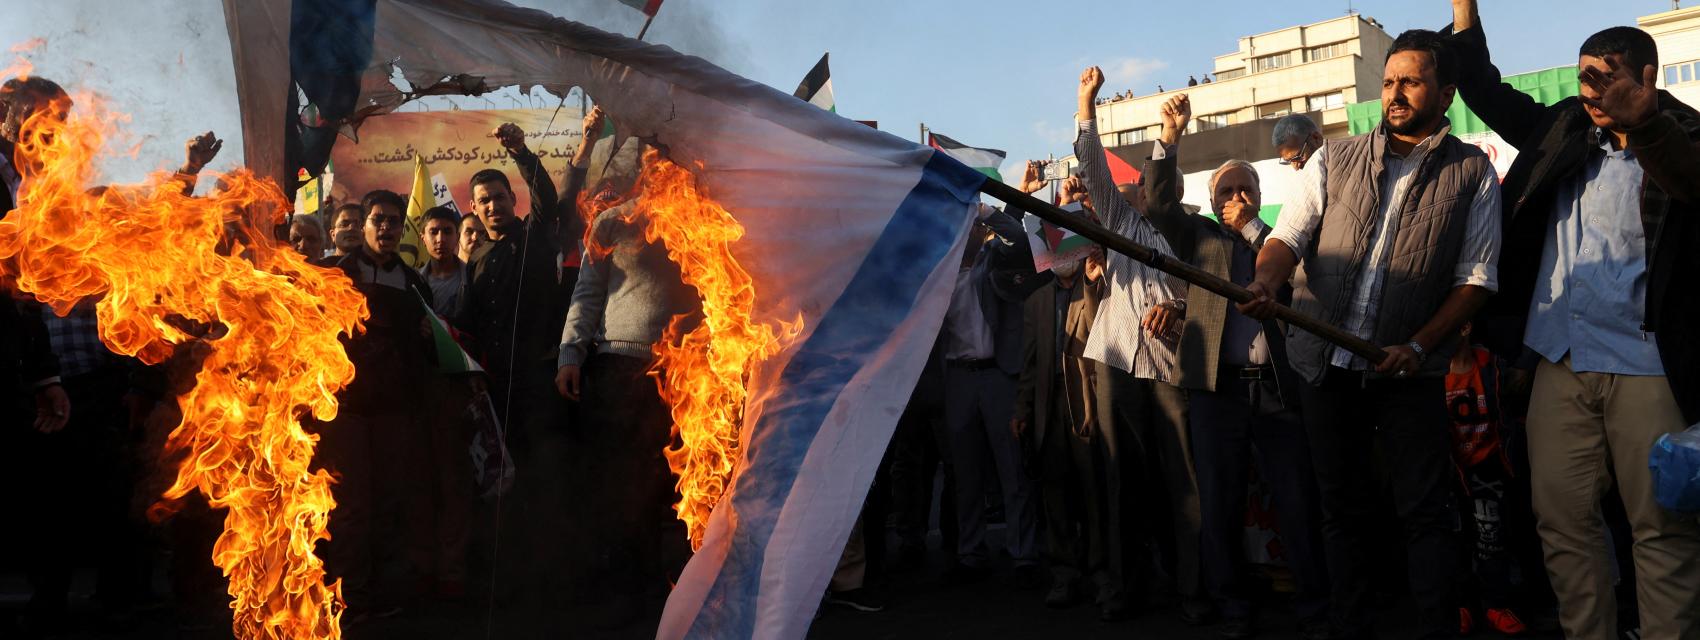 Islamofascism-phobia' and the Iranians standing with Israel